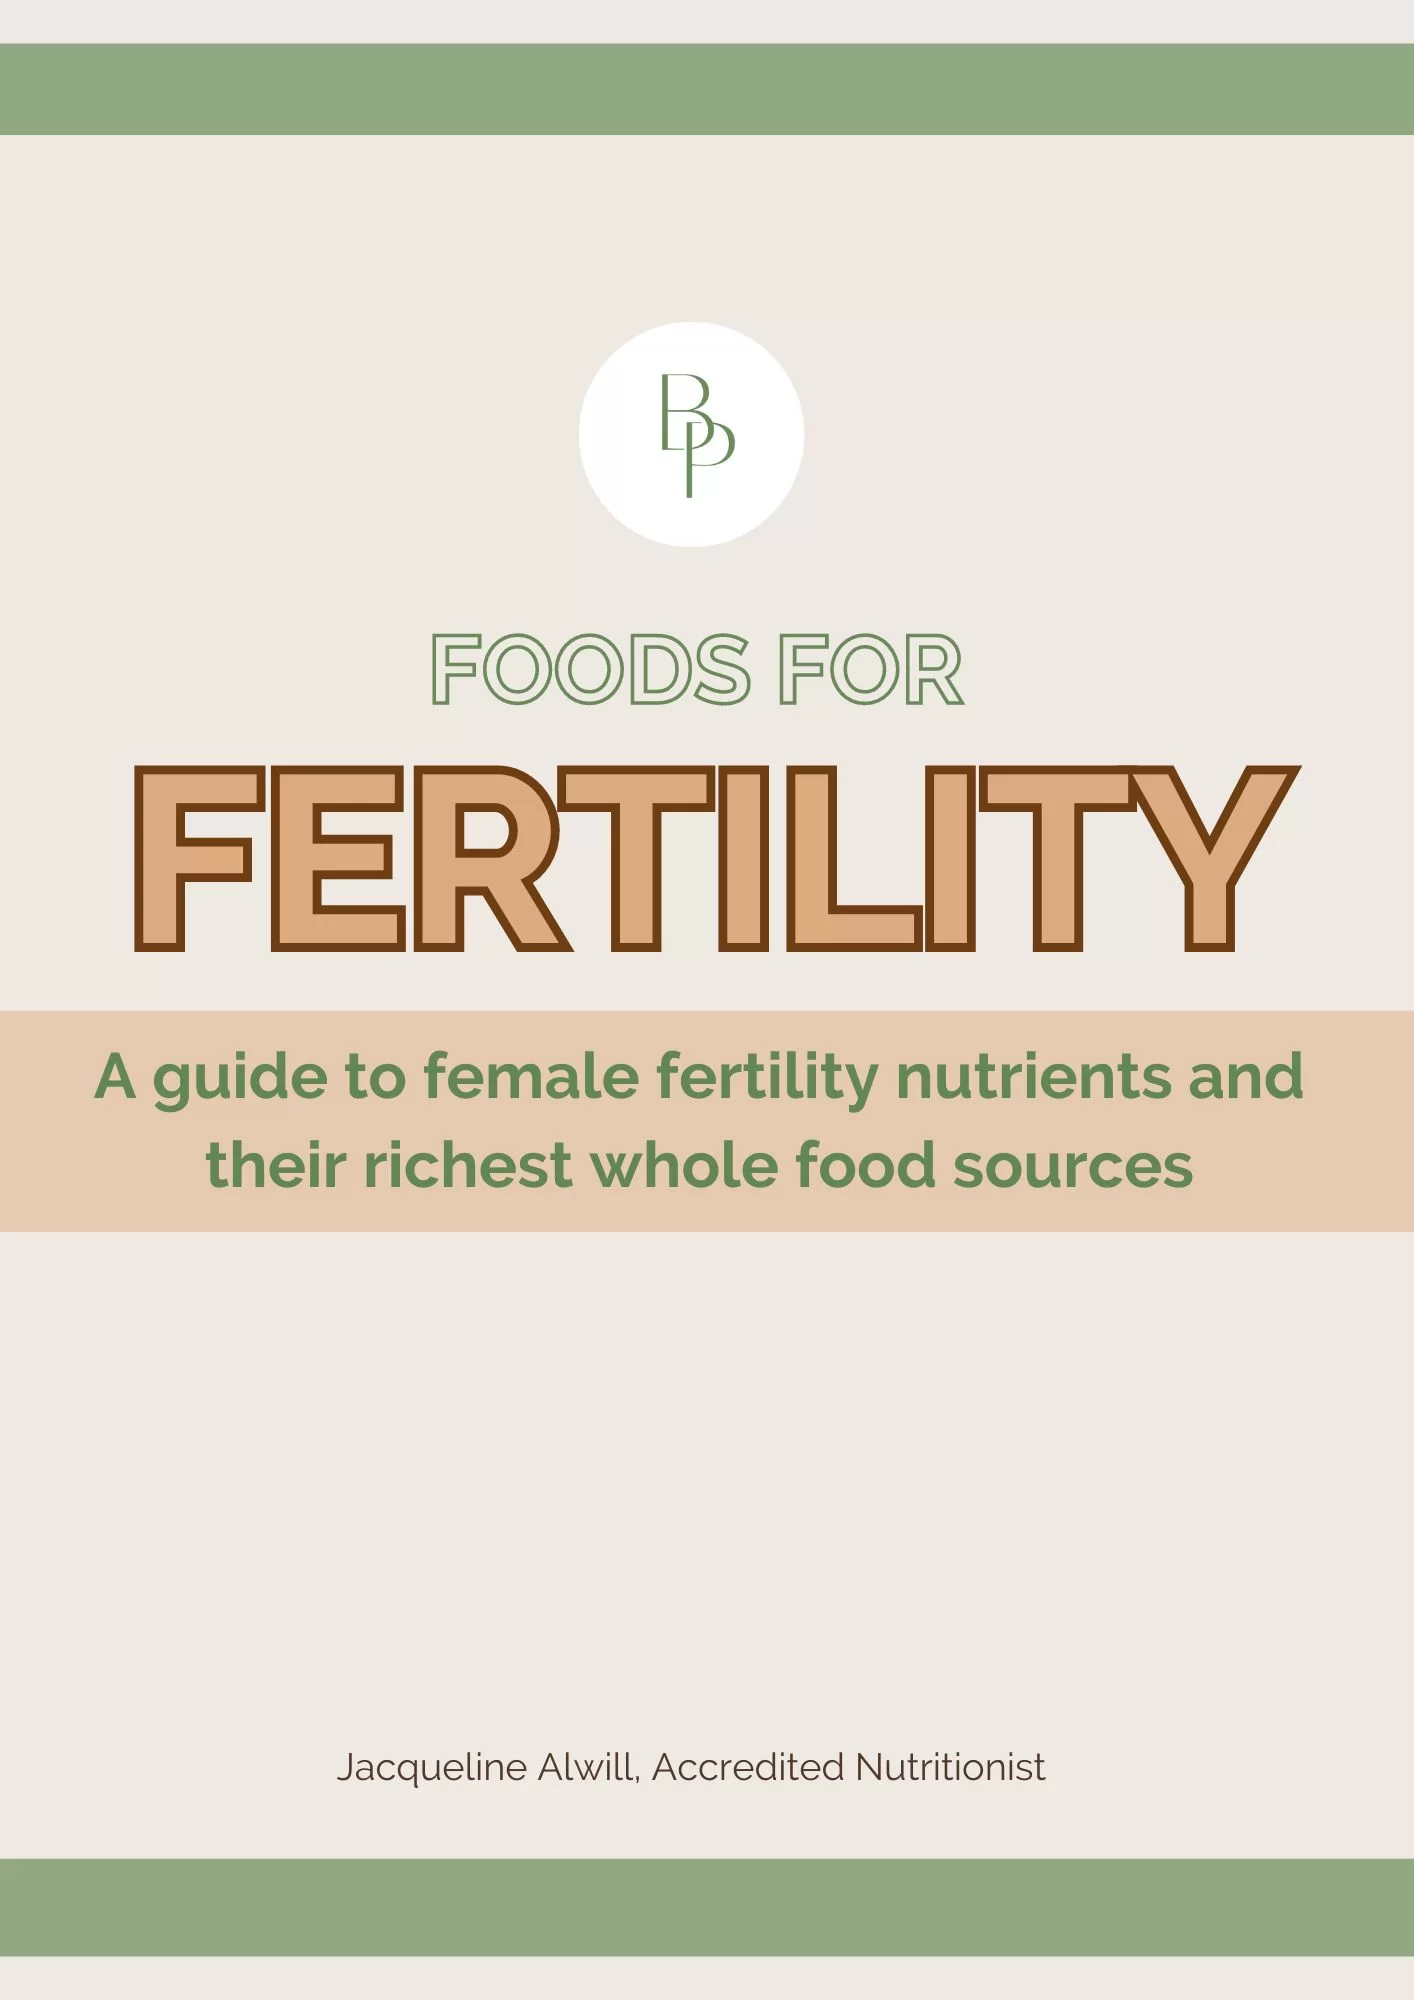 Foods for Fertility Guide (Free)